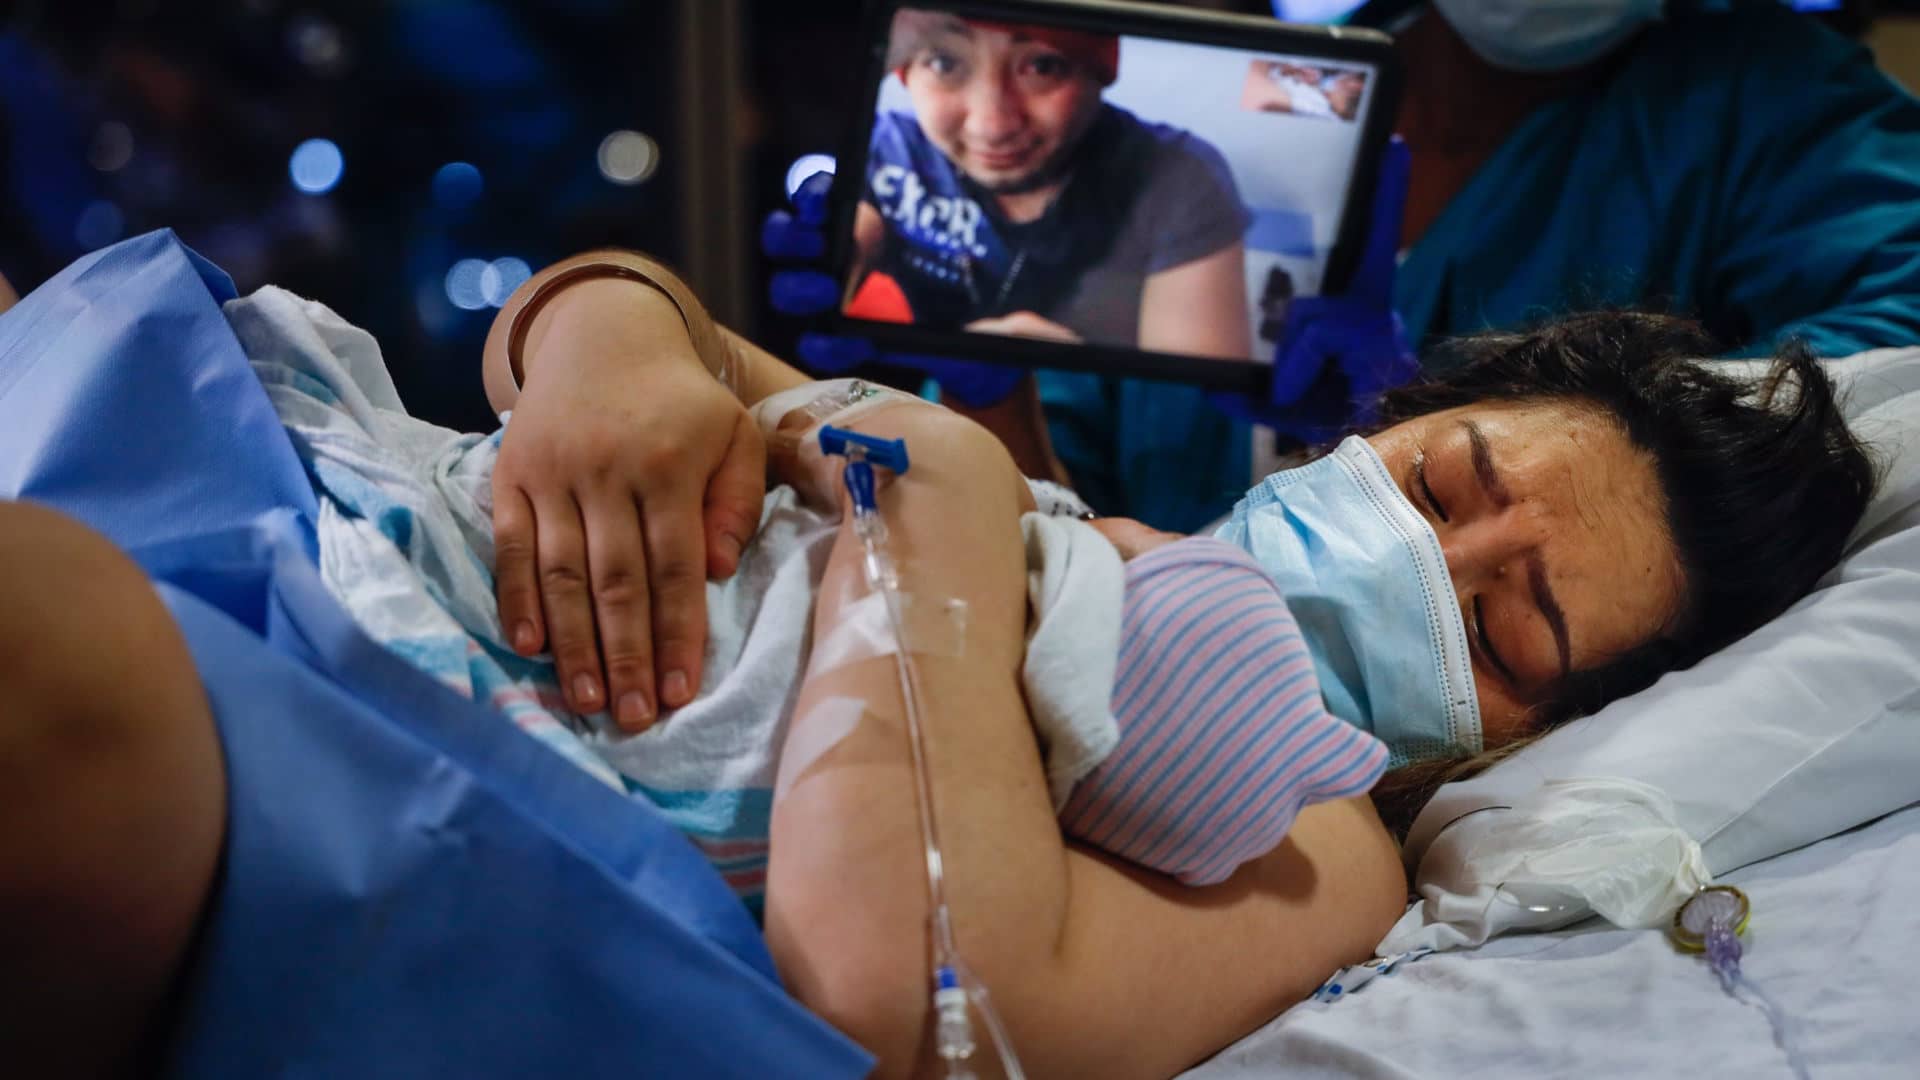 Diana Garcia Garcia holds her baby for the first time as her husband, Manuel Carchipulla, watches via FaceTime in April 2020 in Oceanside, New York.